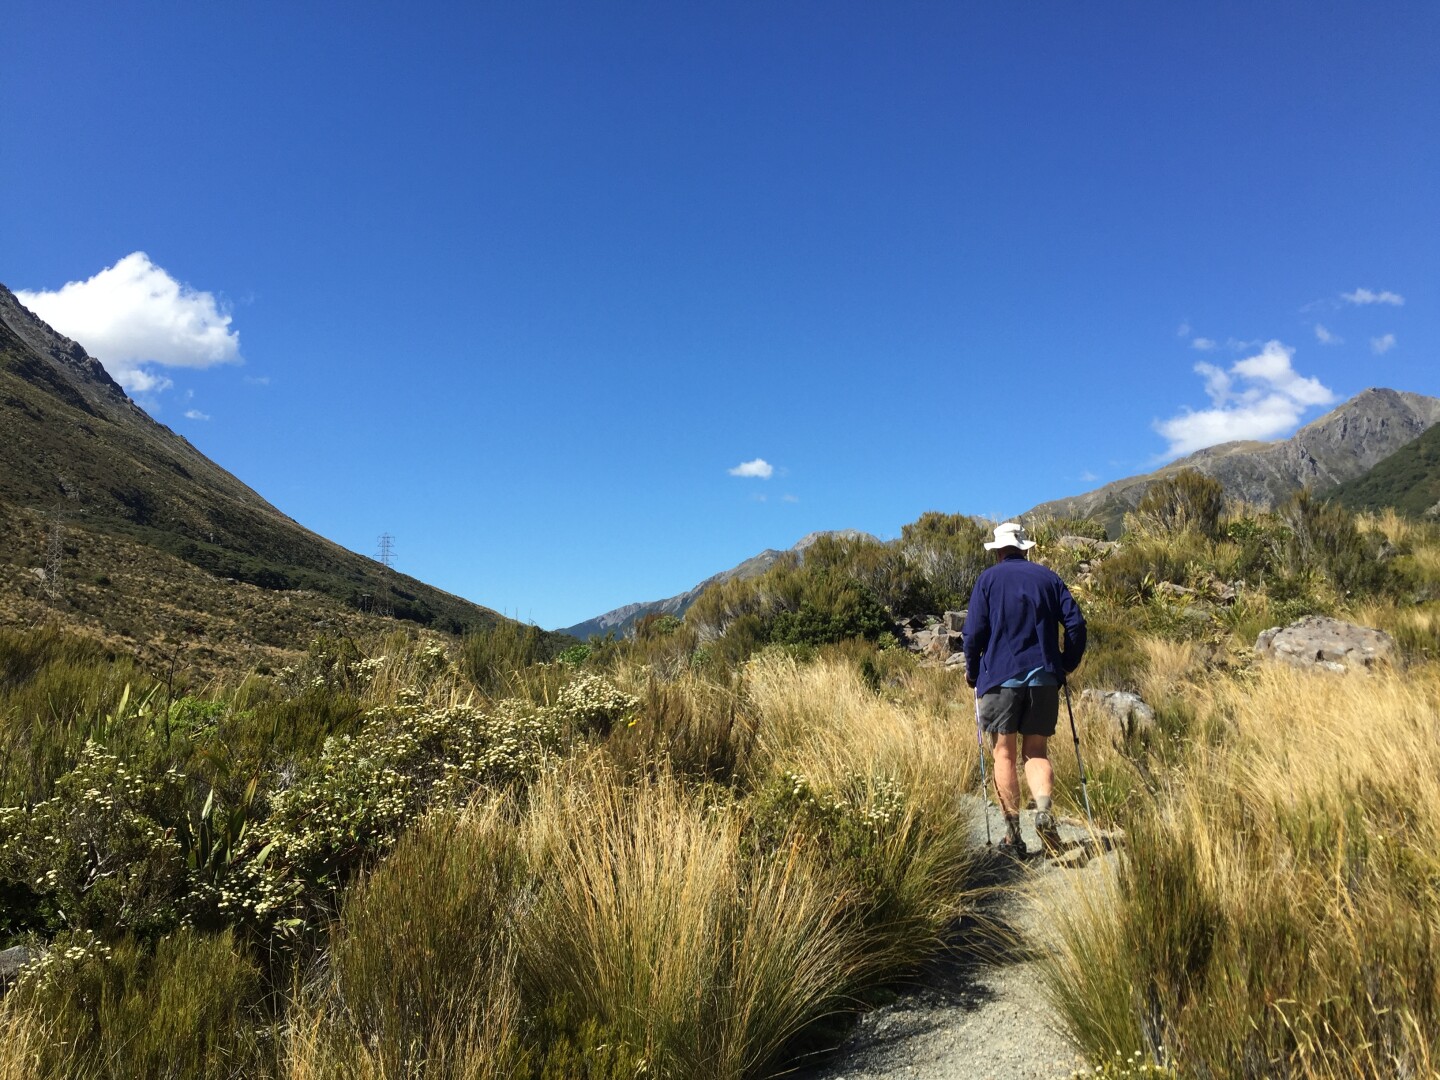 Hike at Arthur's Pass. Just four roads connect the south's West coast to the east.